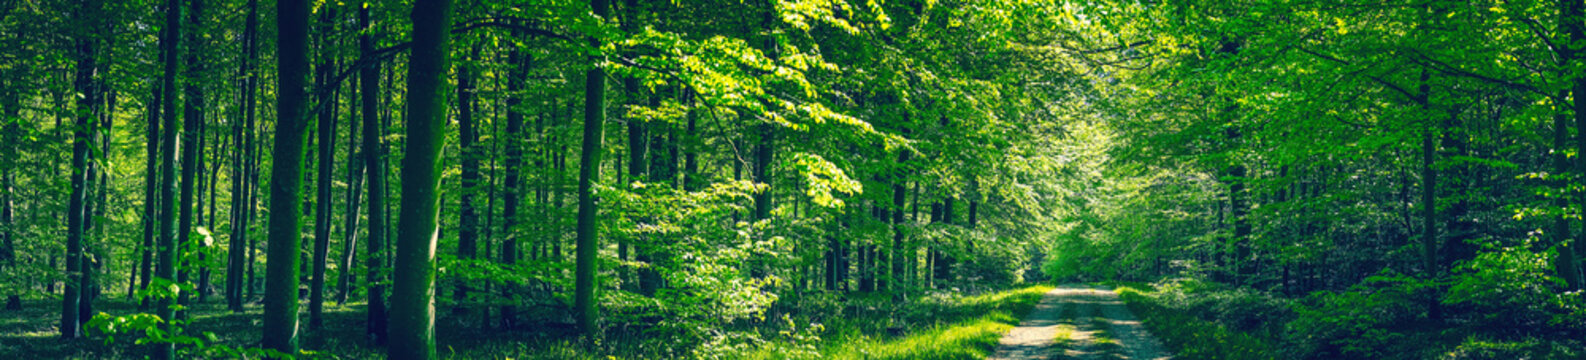 Trees by a road in a green forest